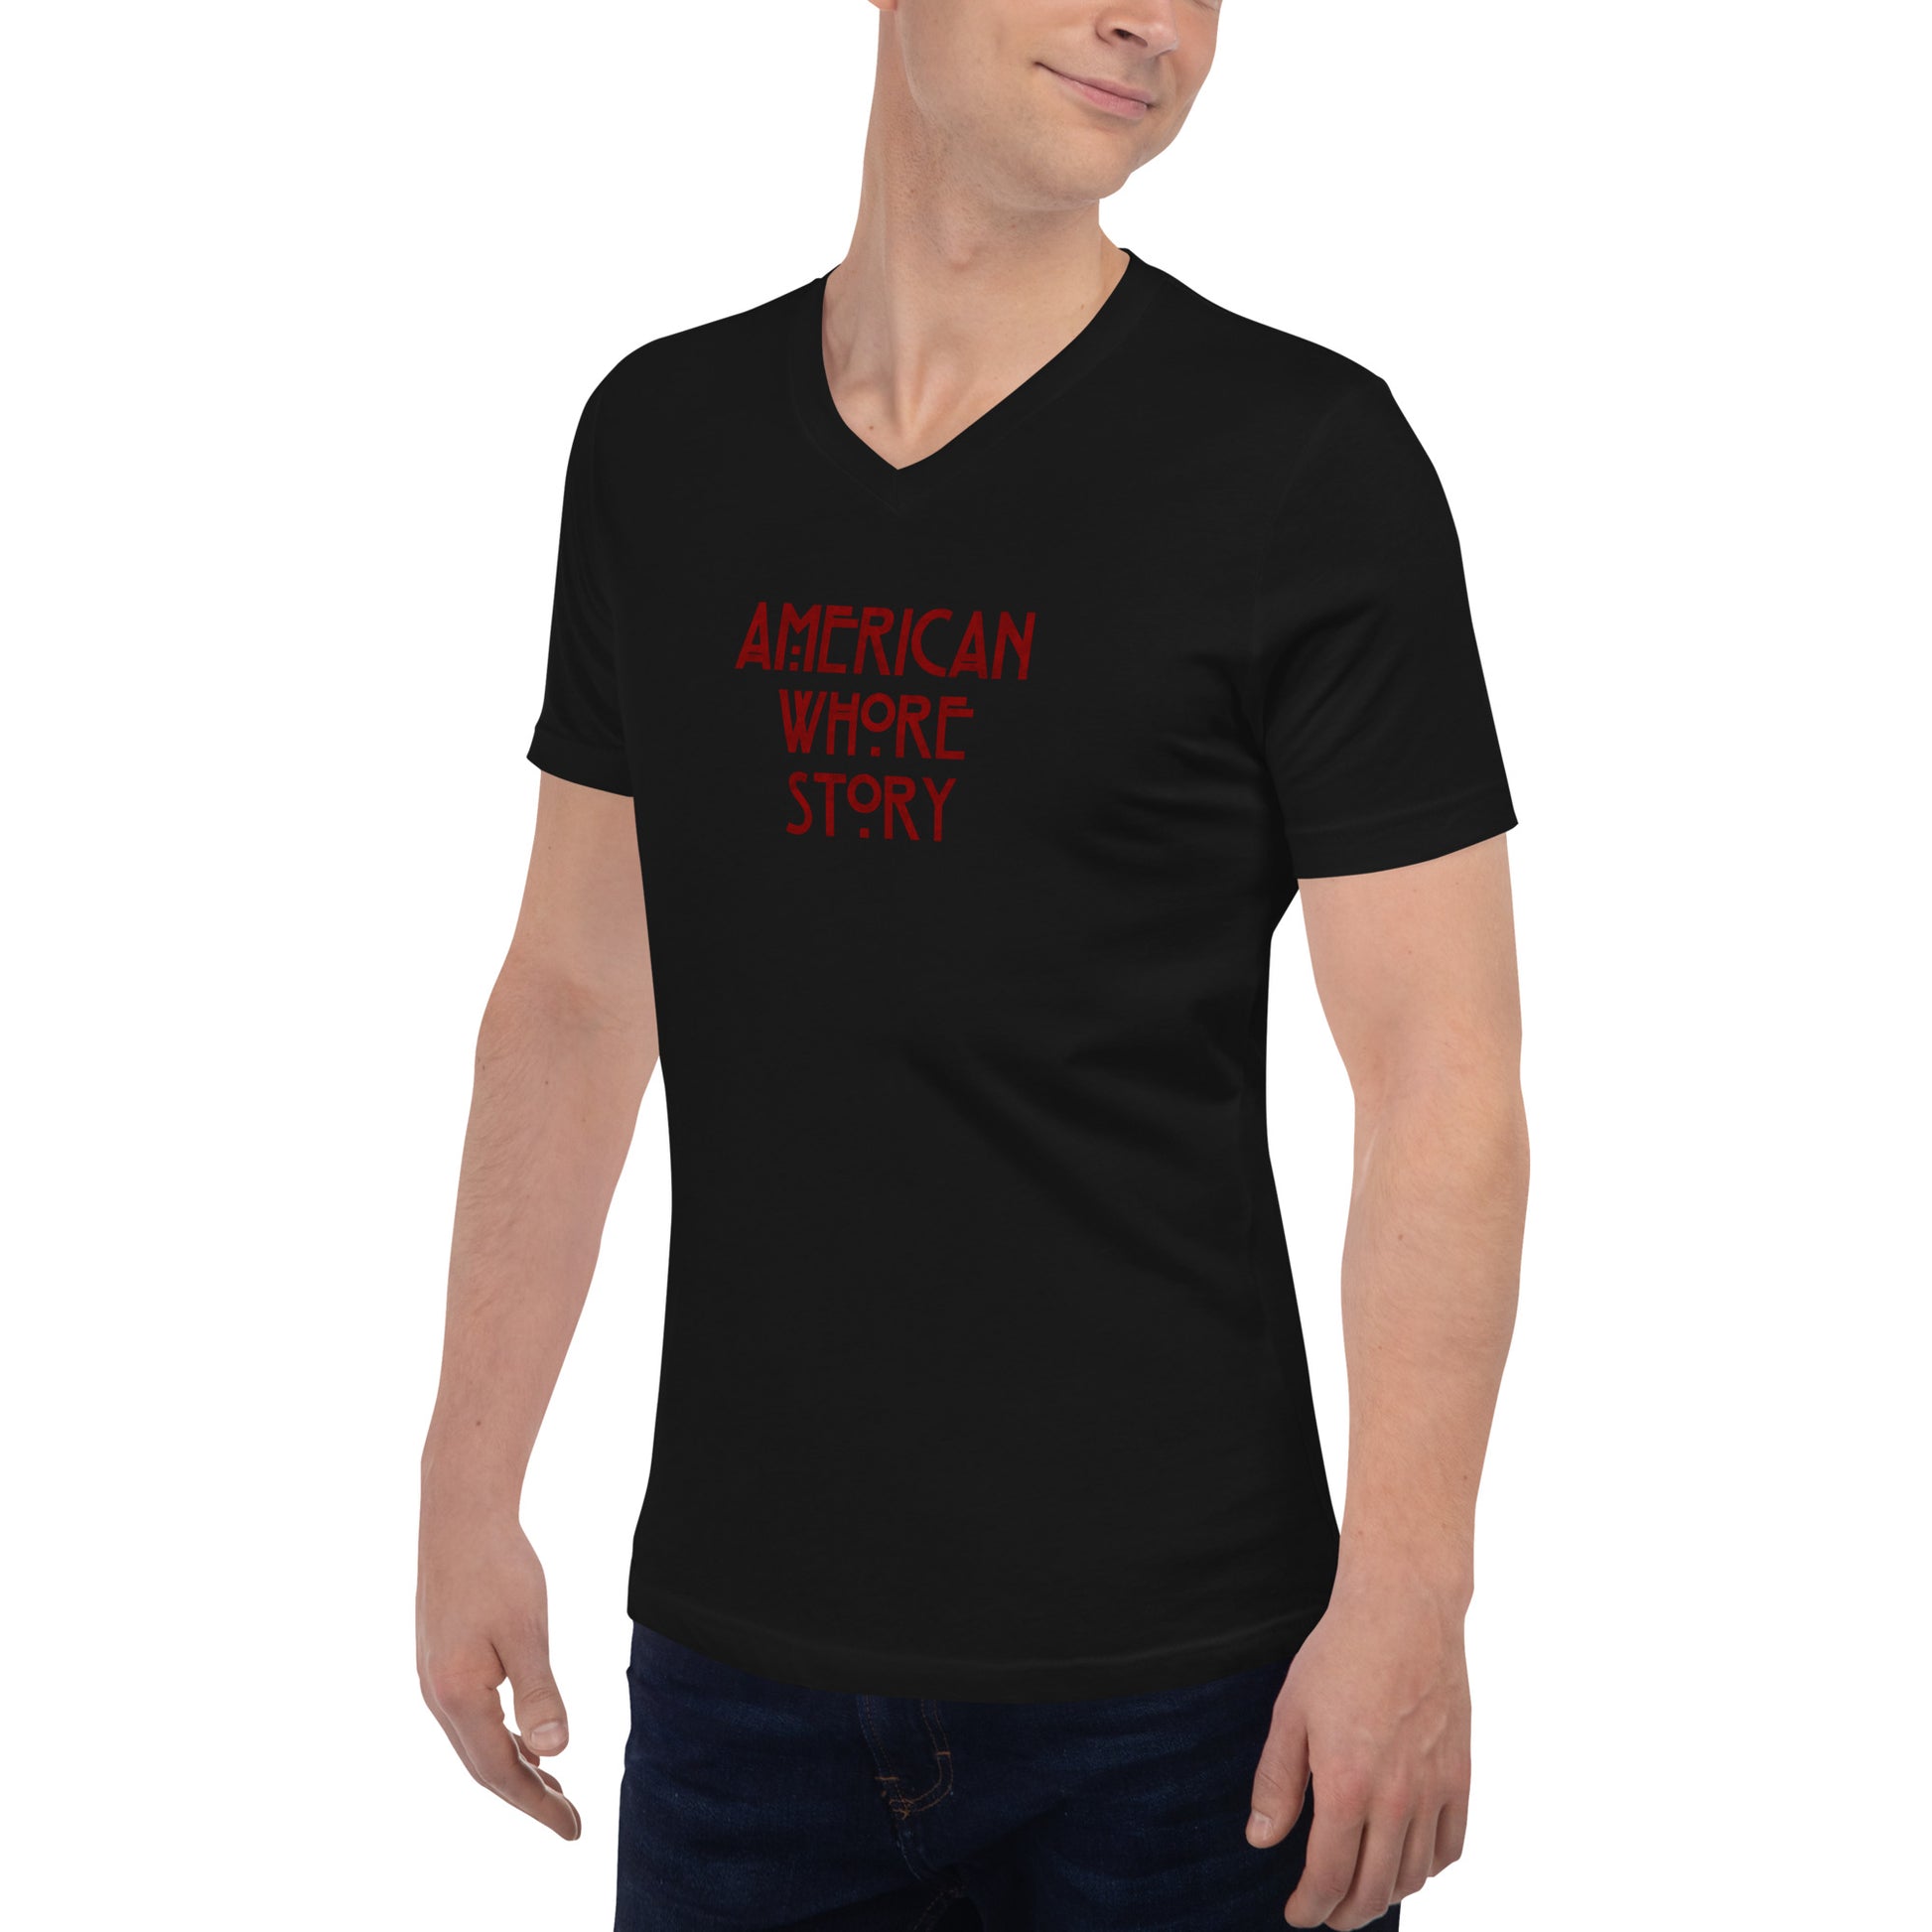 Discover the edgy 'American Whore Story' distressed red lettering unisex V-neck T-shirt from Moody Booty Apparel. Unleash your irreverent side with this LGBTQ-themed graphic shirt. Stand out and show your pride with this bold and fashionable piece of clothing.